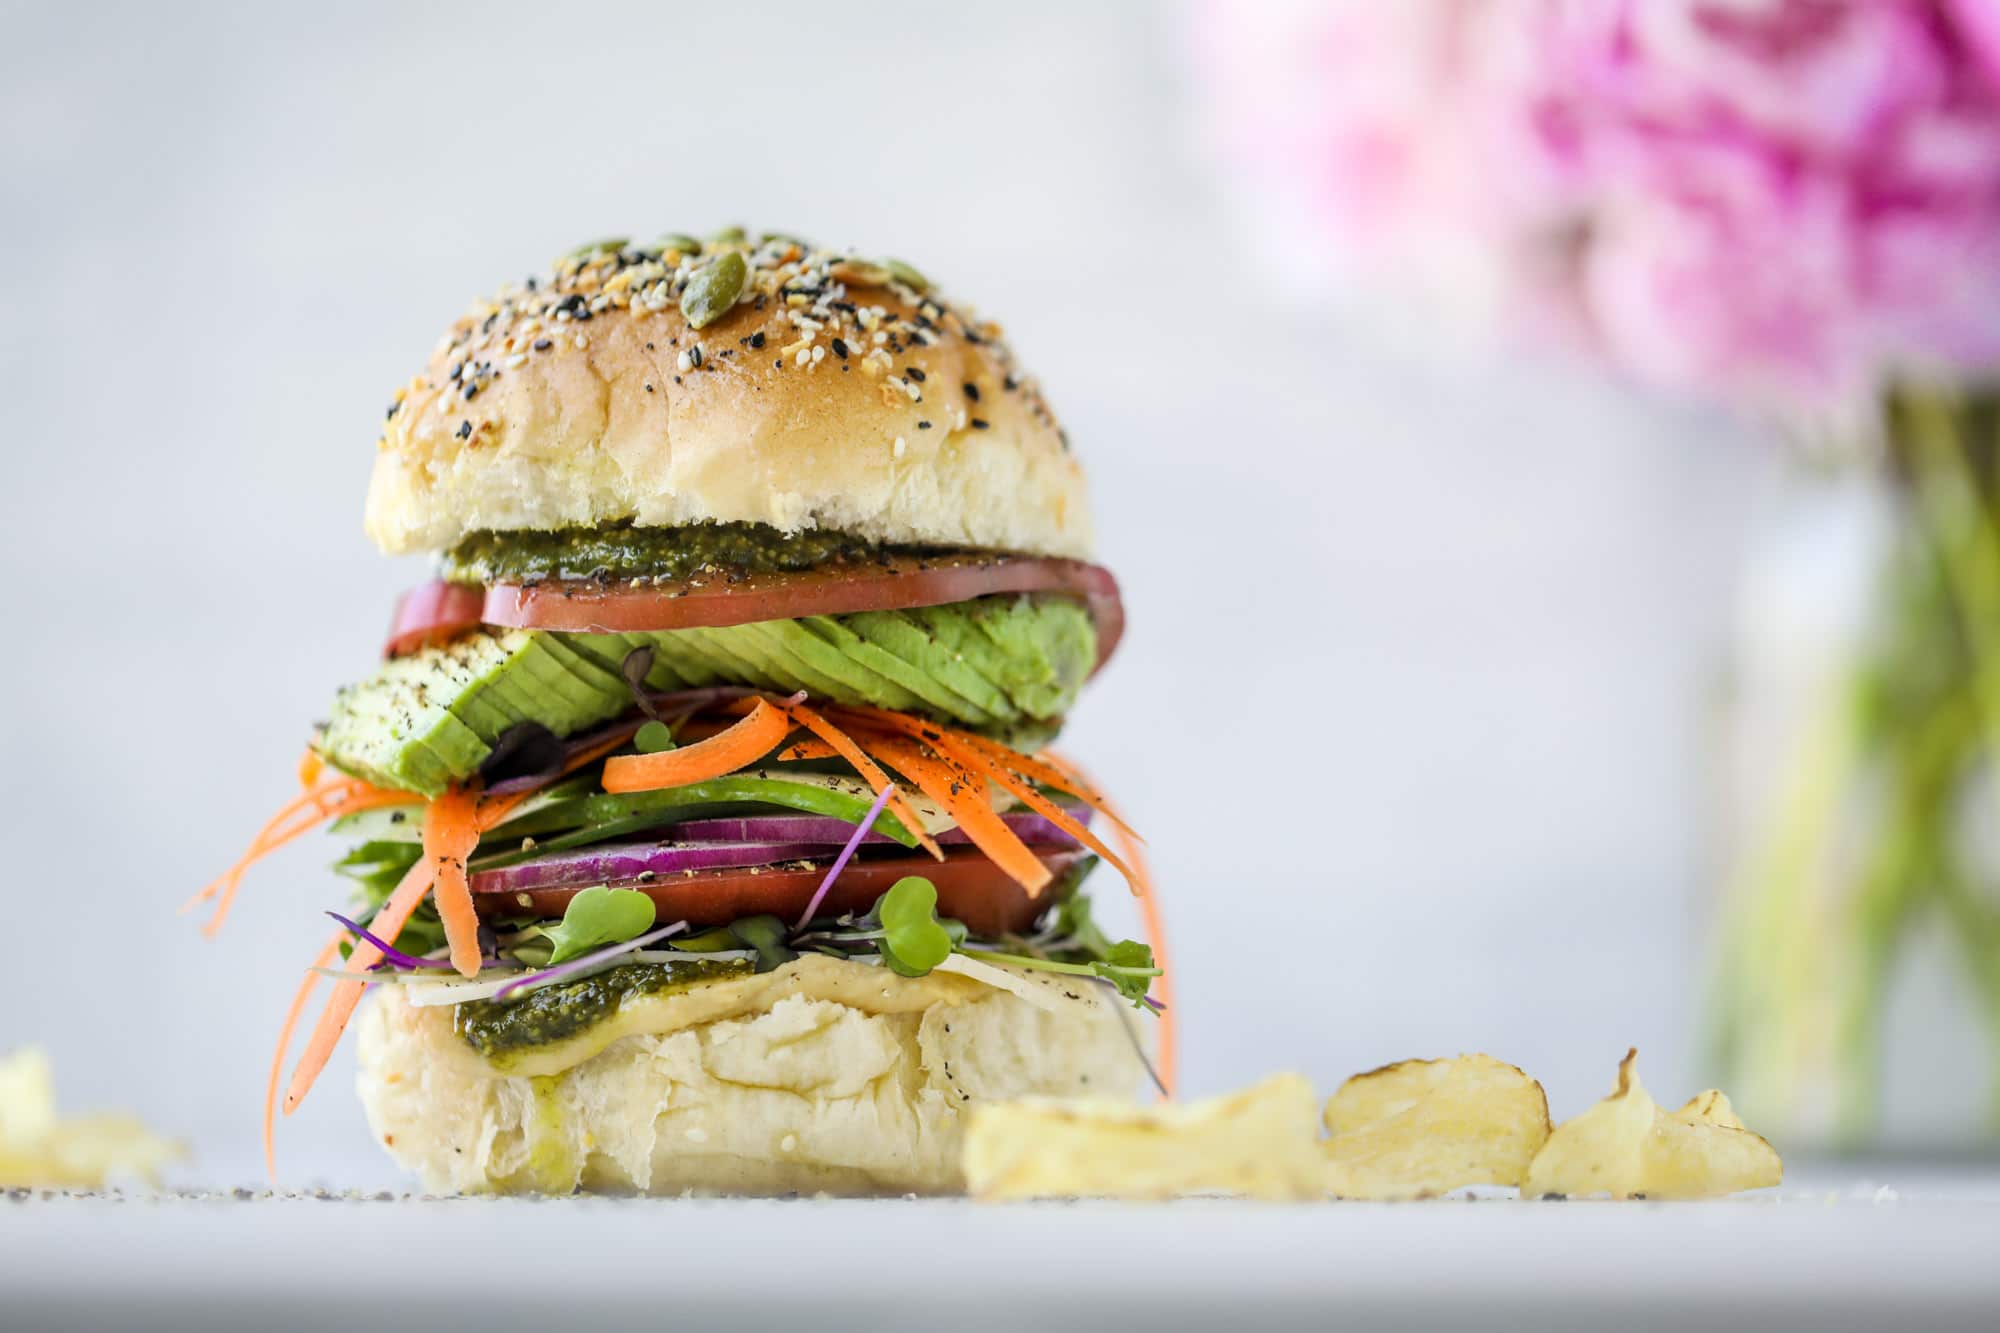 This summer veggie sandwich is full of creamy hummus, fresh pesto and havarti cheese along with tons of sliced, fresh vegetables. Best lunch ever!